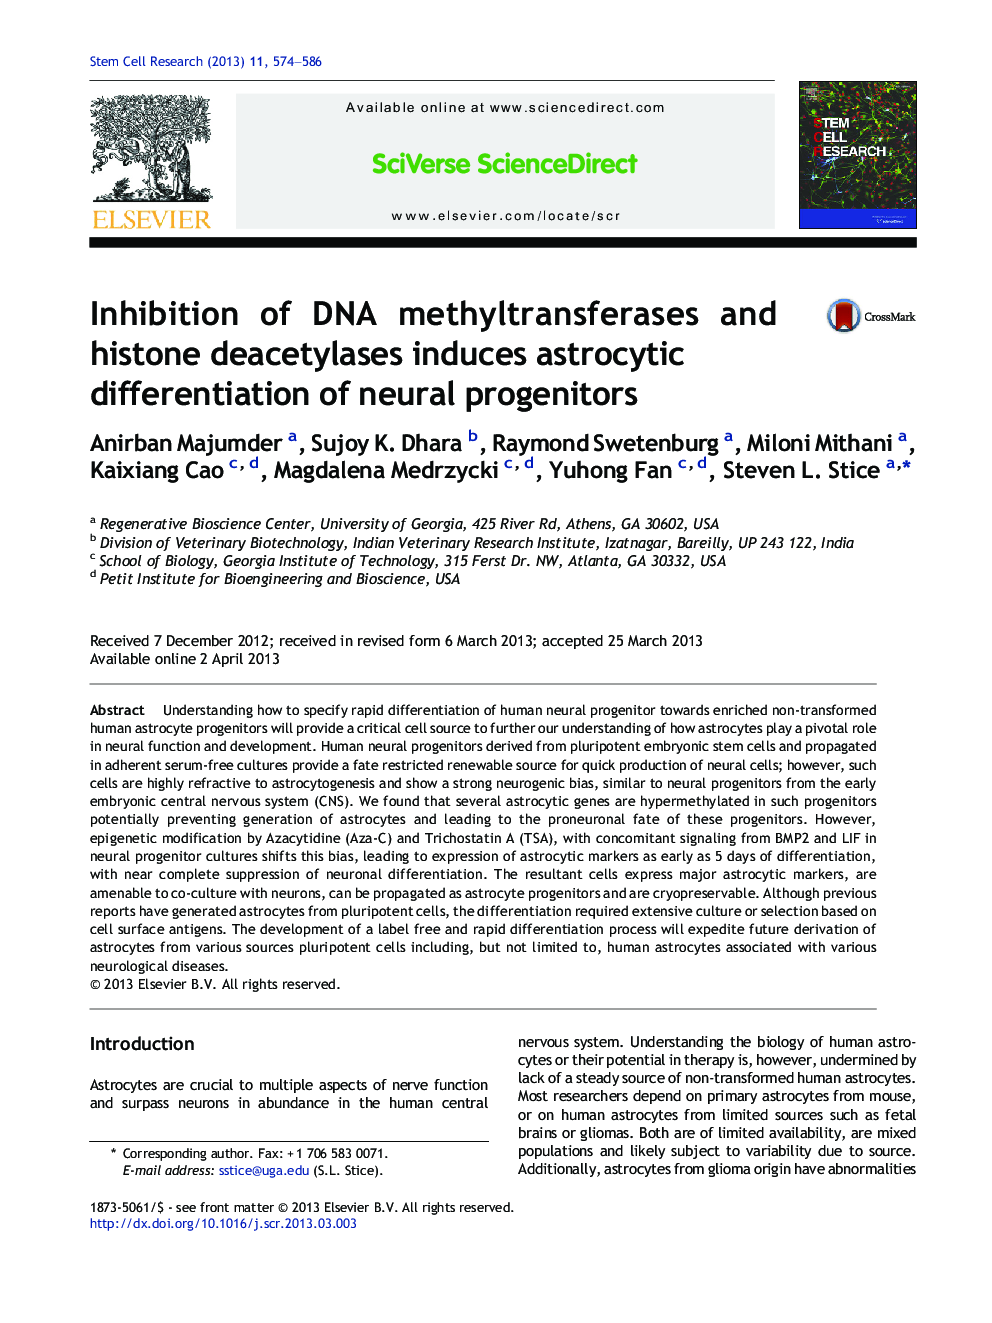 Inhibition of DNA methyltransferases and histone deacetylases induces astrocytic differentiation of neural progenitors